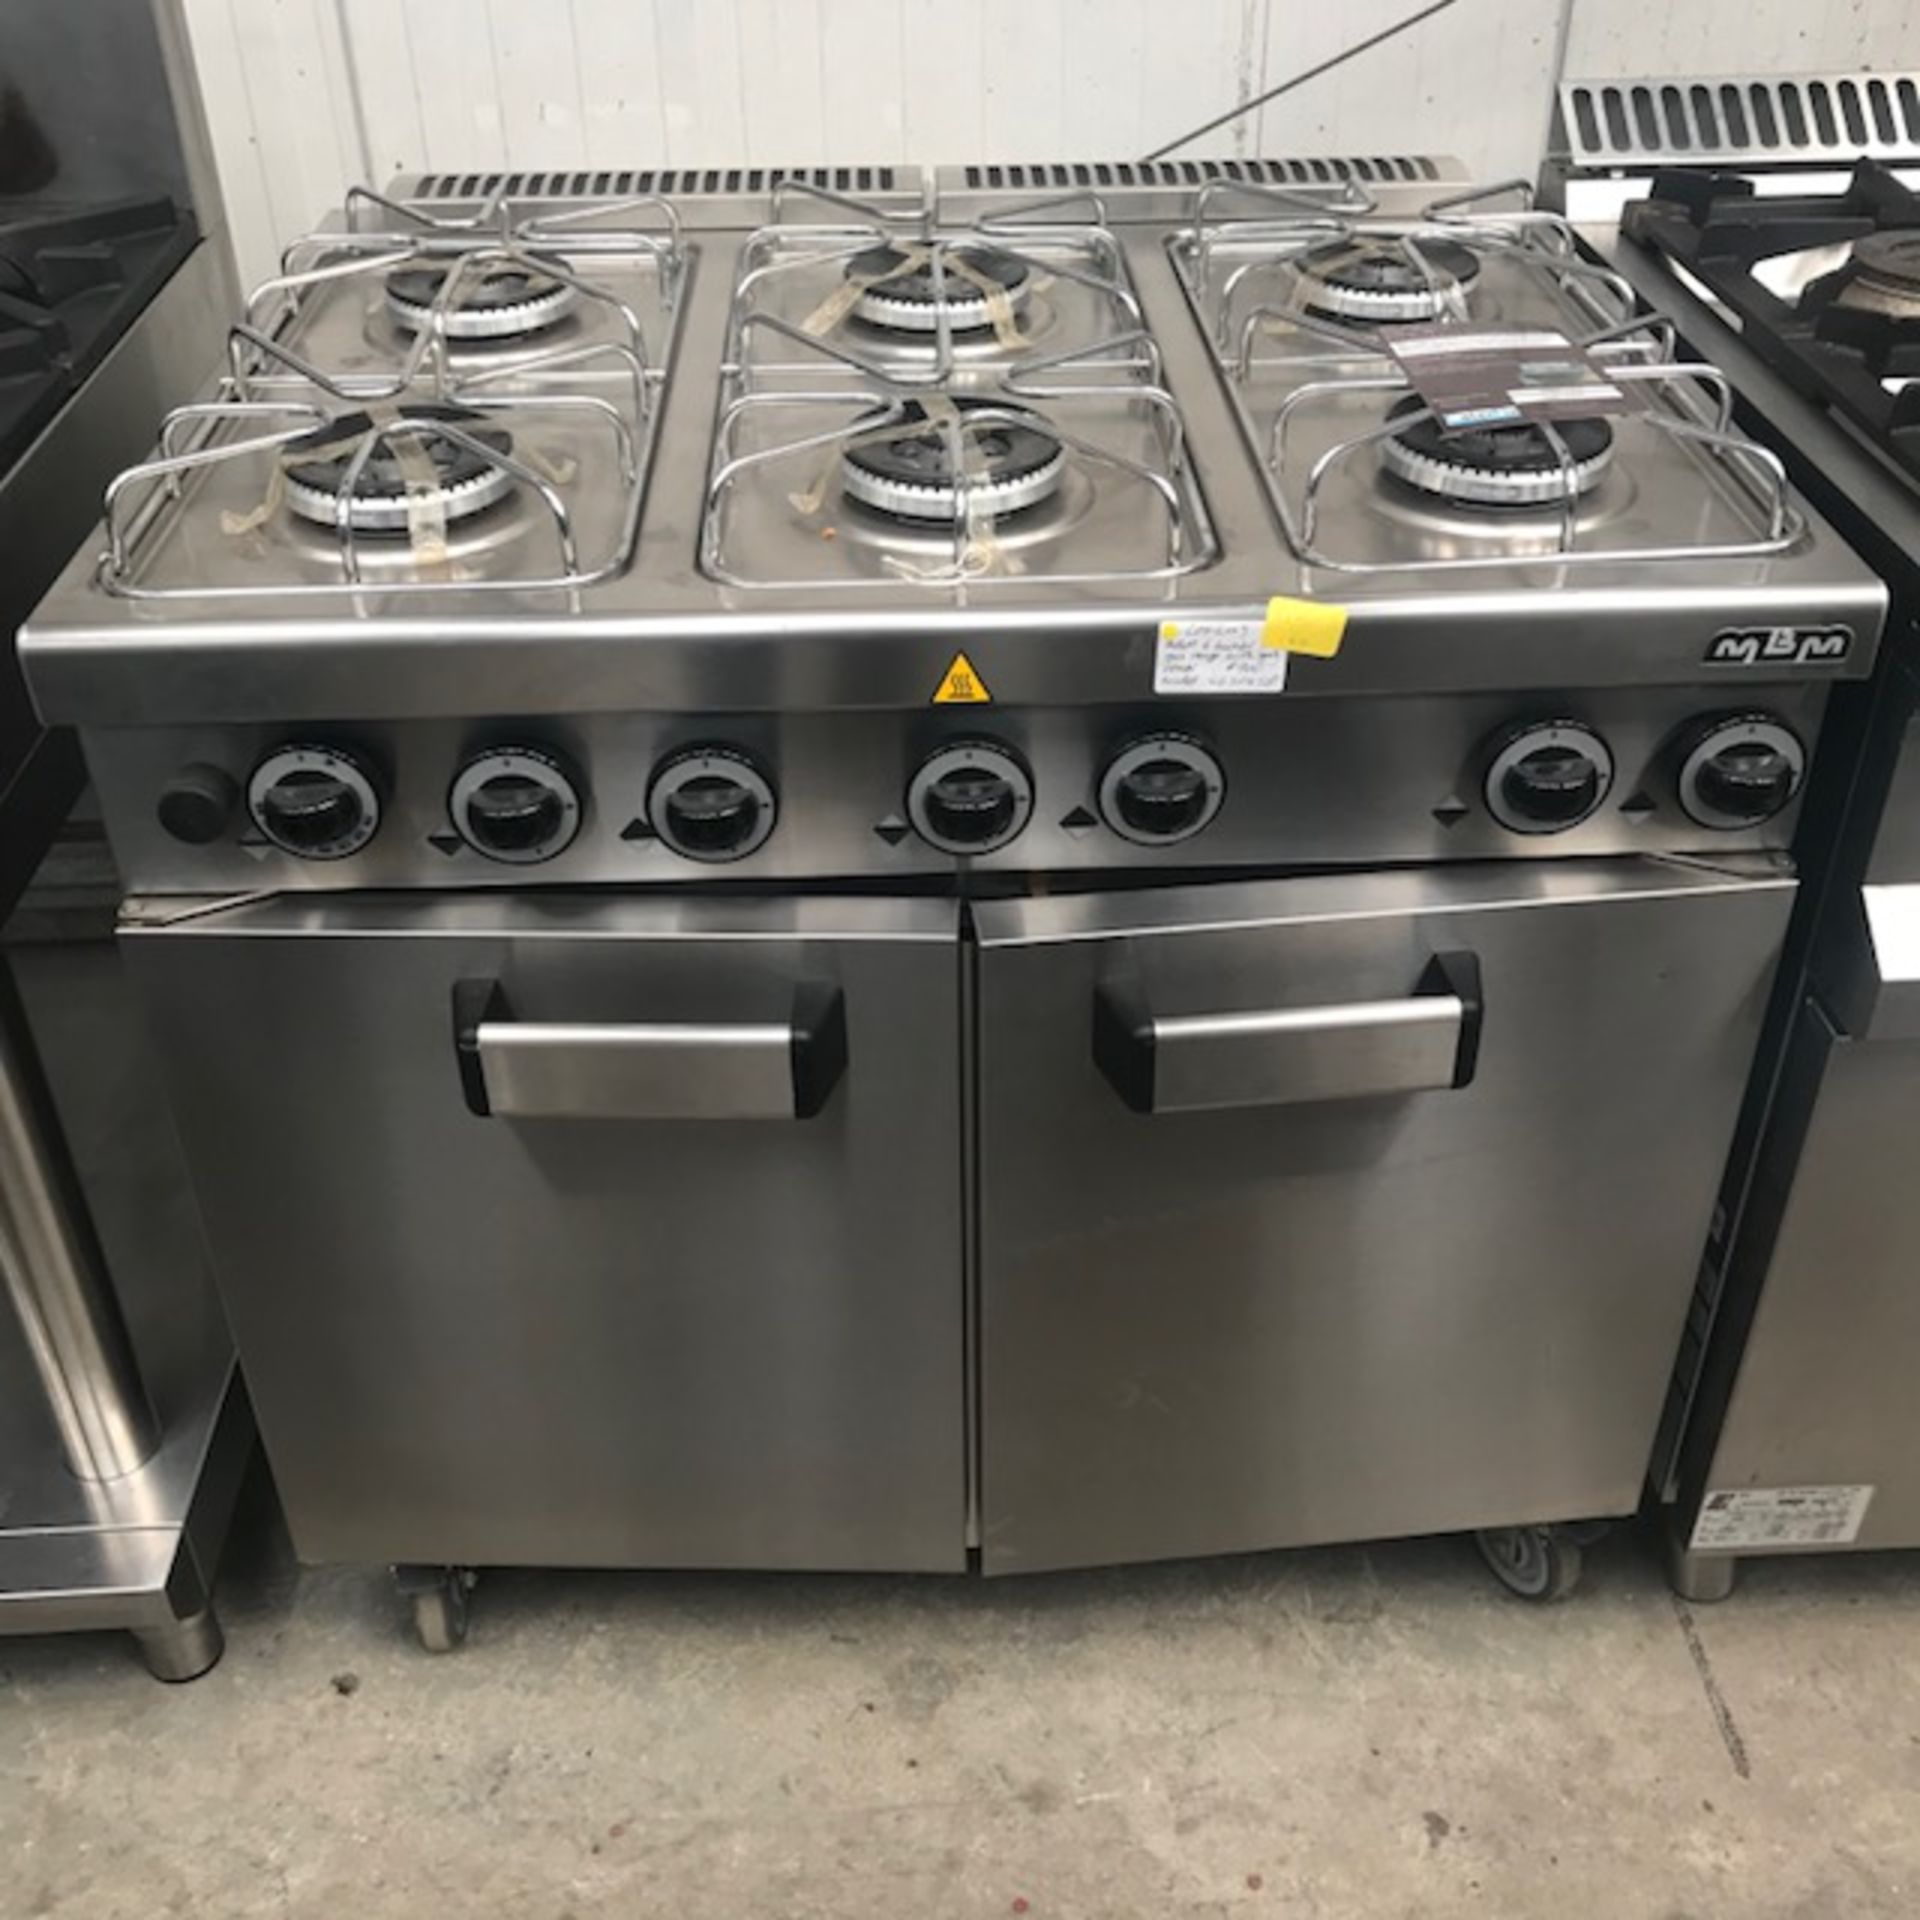 MBM G6SF972P 6 BURNER GAS COOKER WITH OVEN MBM G6SF972P 6 burner brand new The watertight pressed, - Image 2 of 2